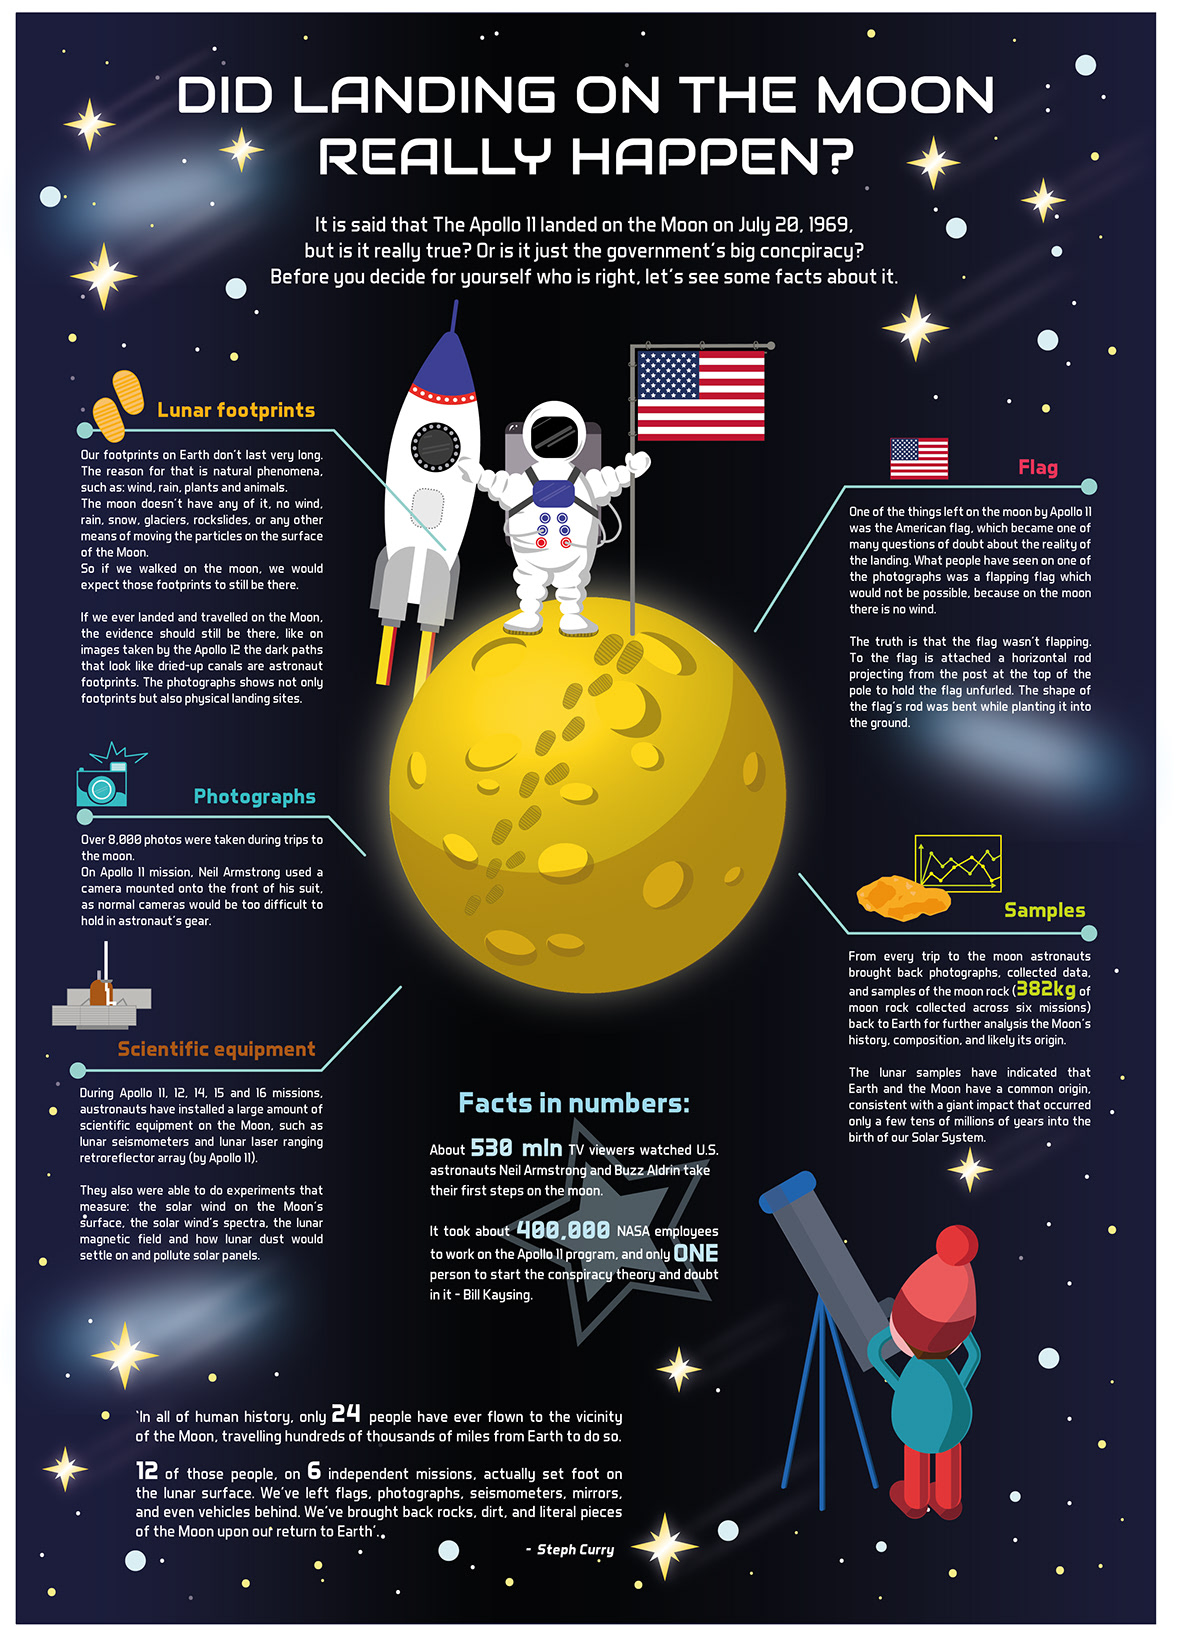 Landing on the Moon infographic on Behance